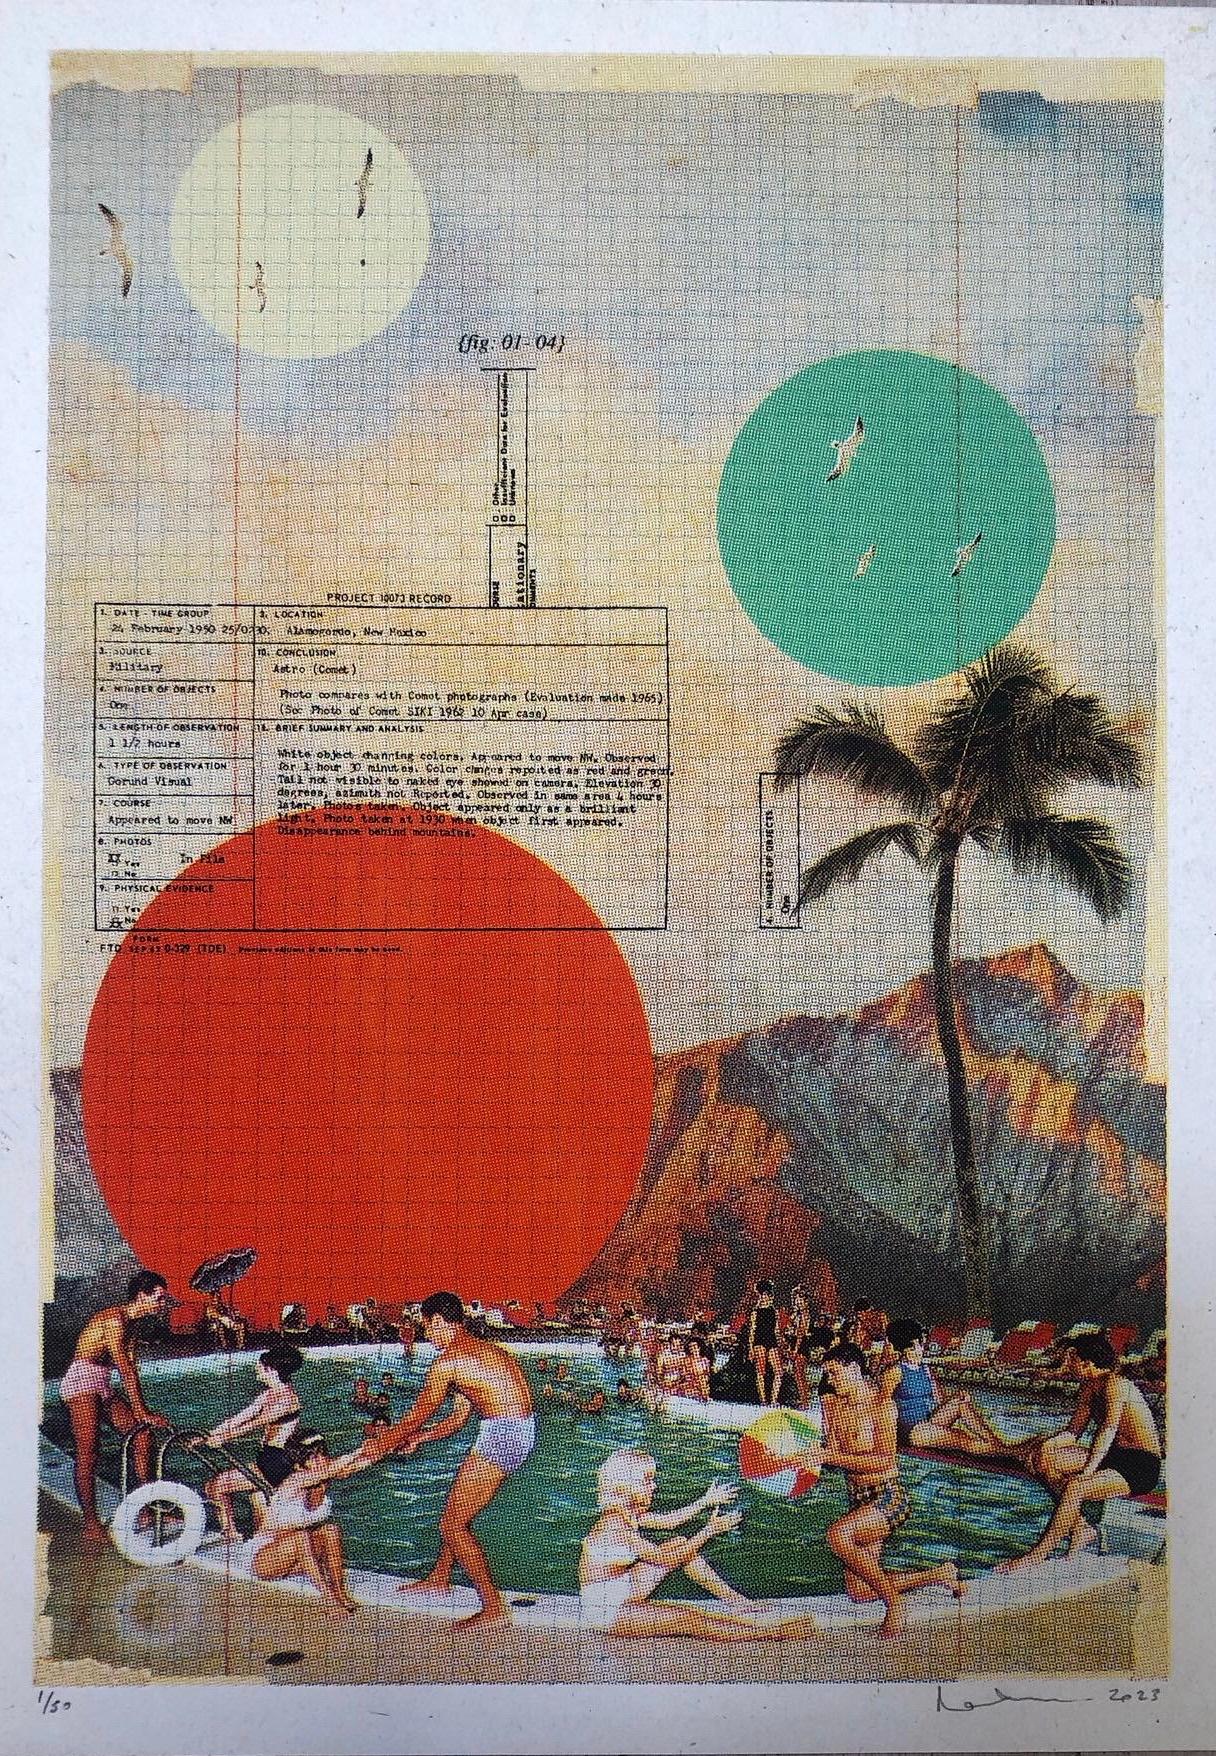 Pool party, a4